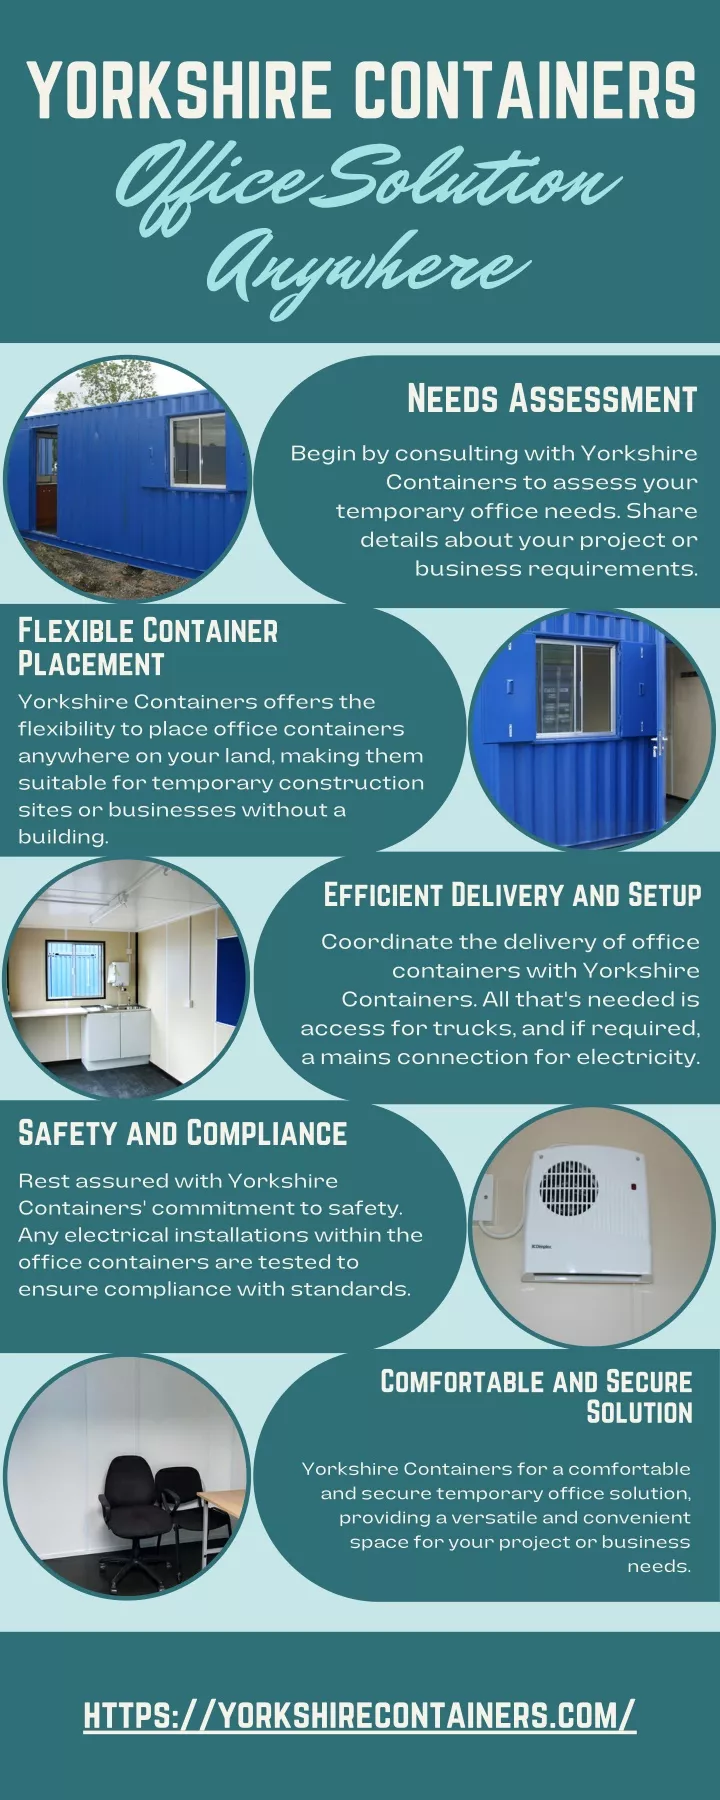 yorkshire containers office solution anywhere